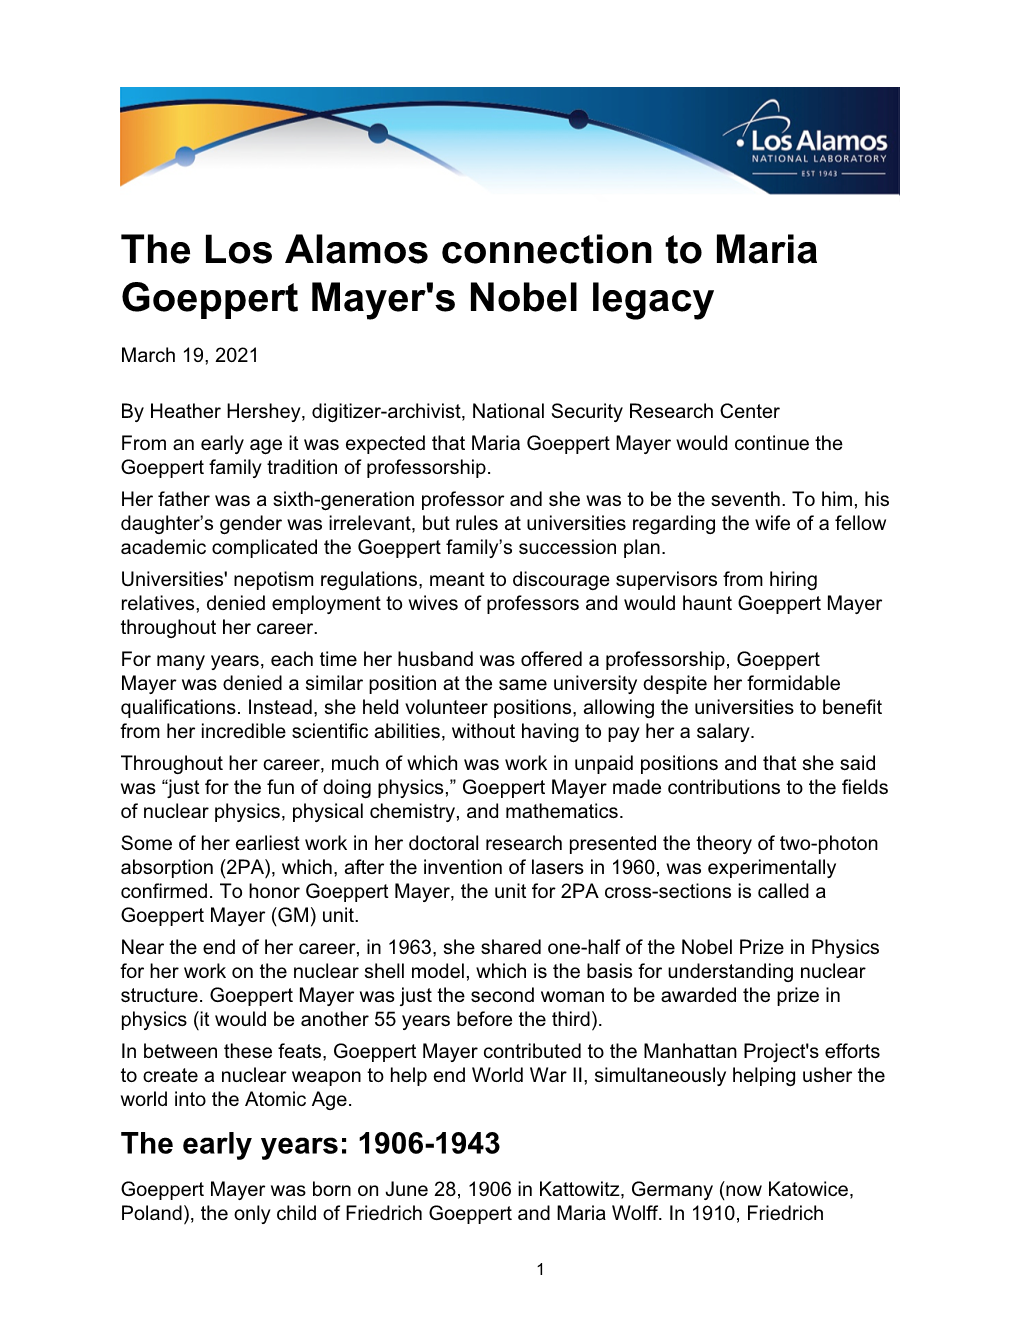 The Los Alamos Connection to Maria Goeppert Mayer's Nobel Legacy